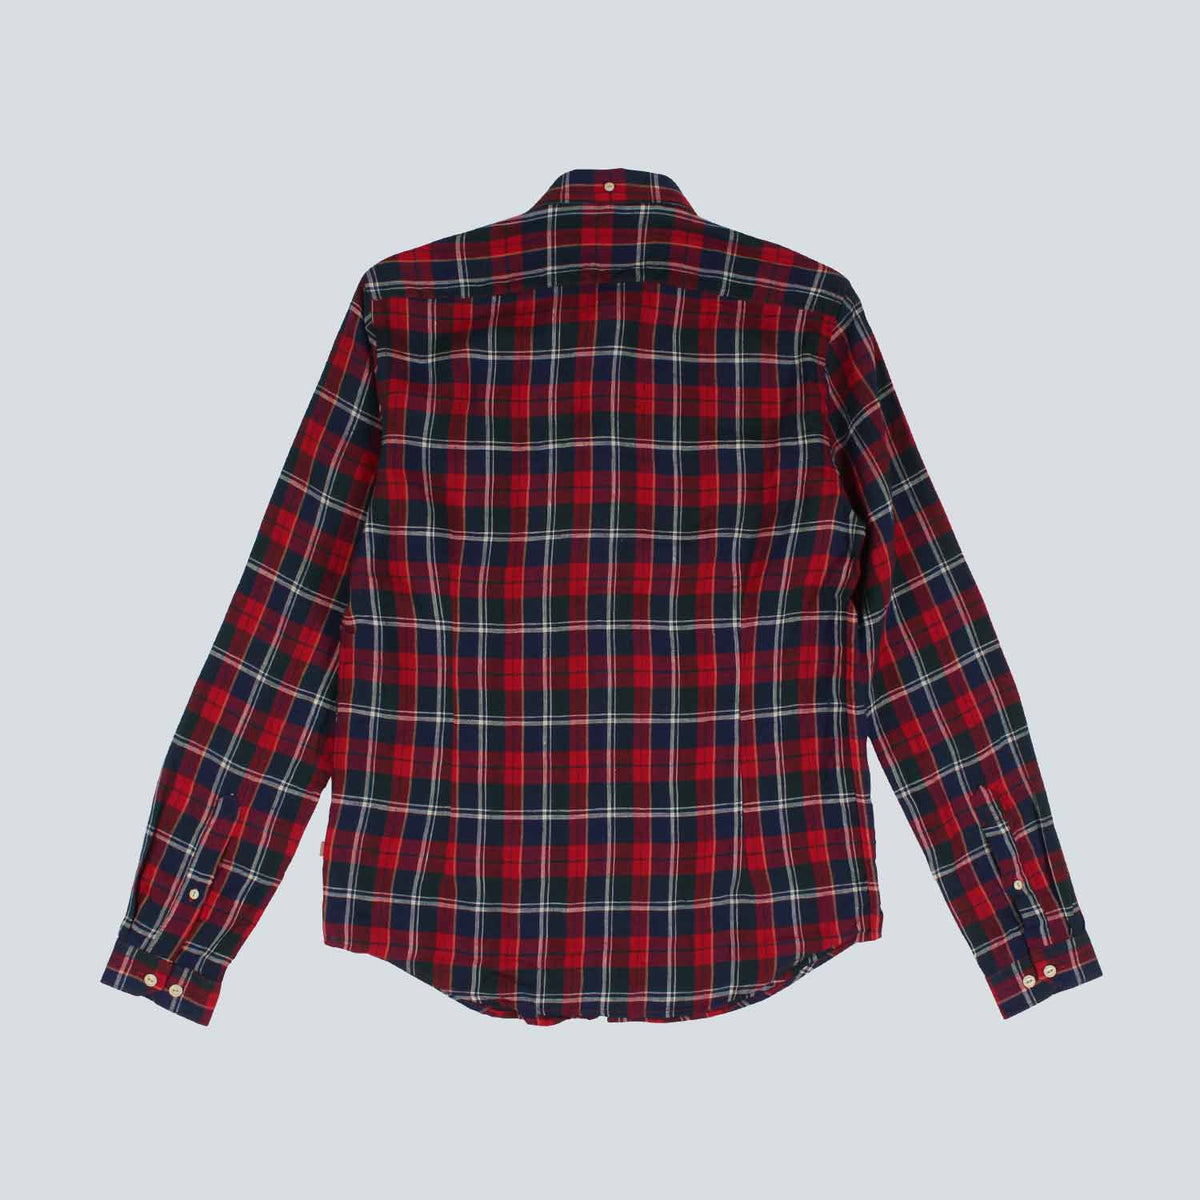 Barbour - William Shirt - Rich Red